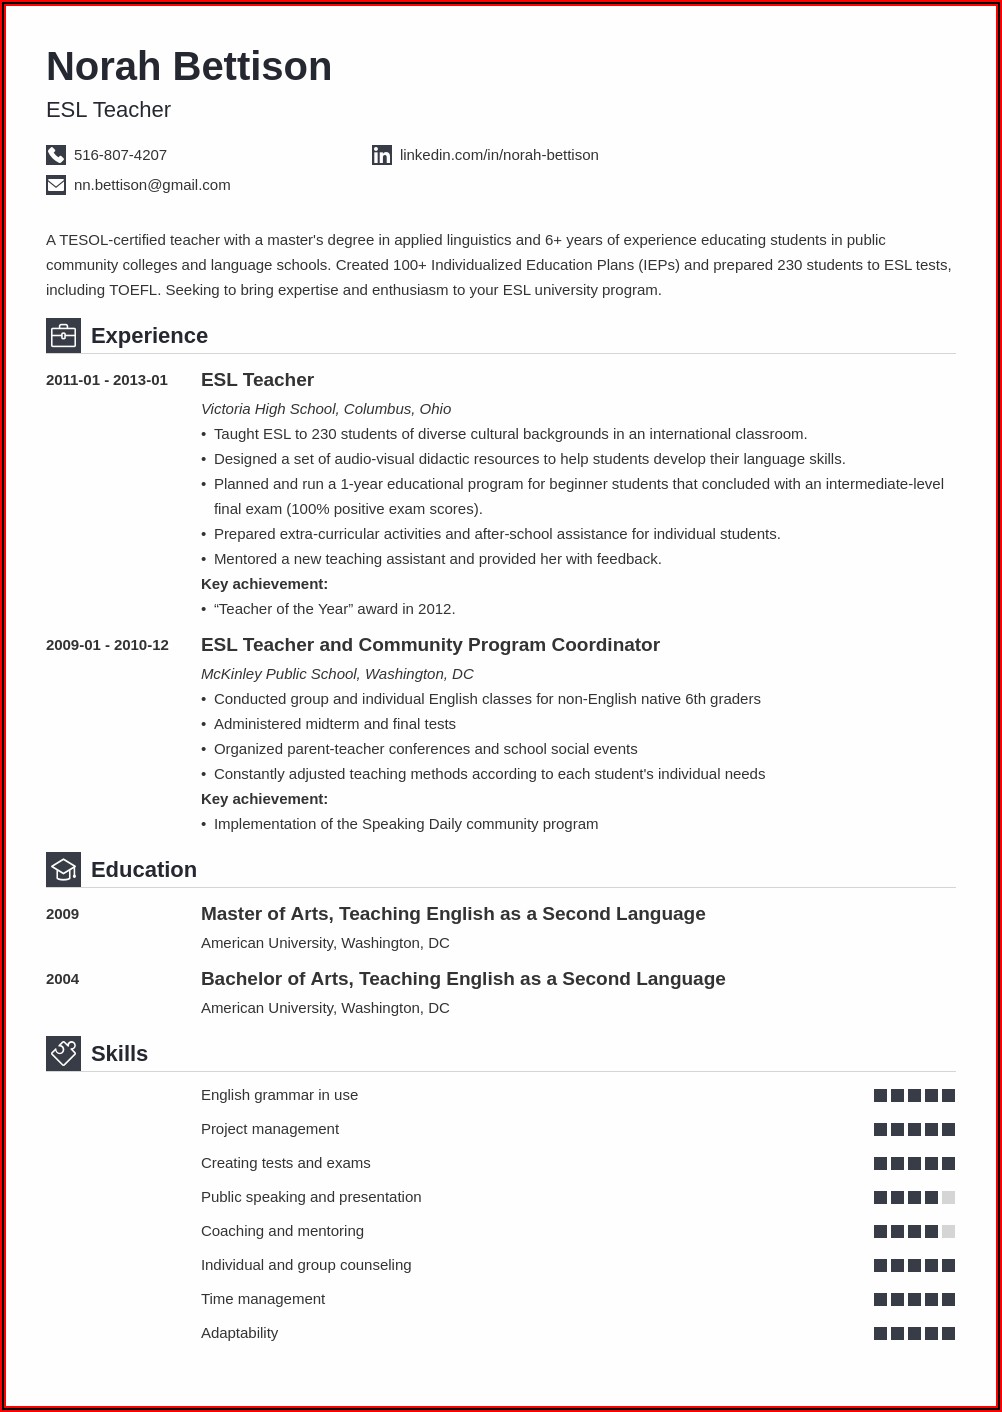 Resume Example For Teaching Position